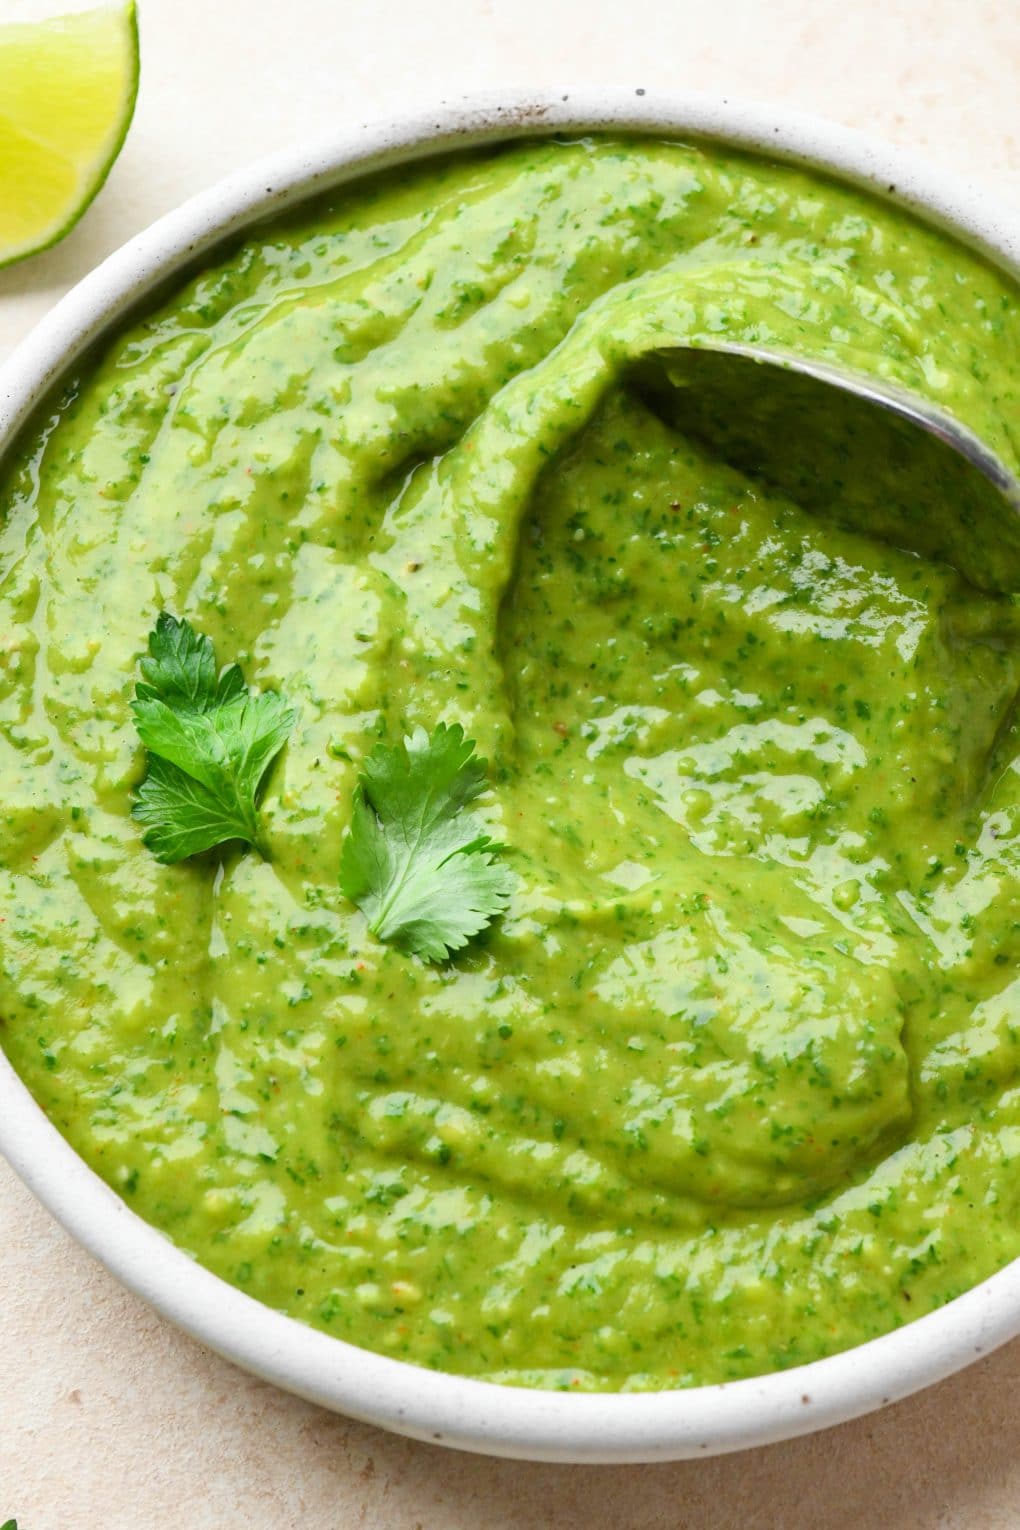 Close up shot of a spoon dipping into a shallow bowl of green sauce to show the texture.